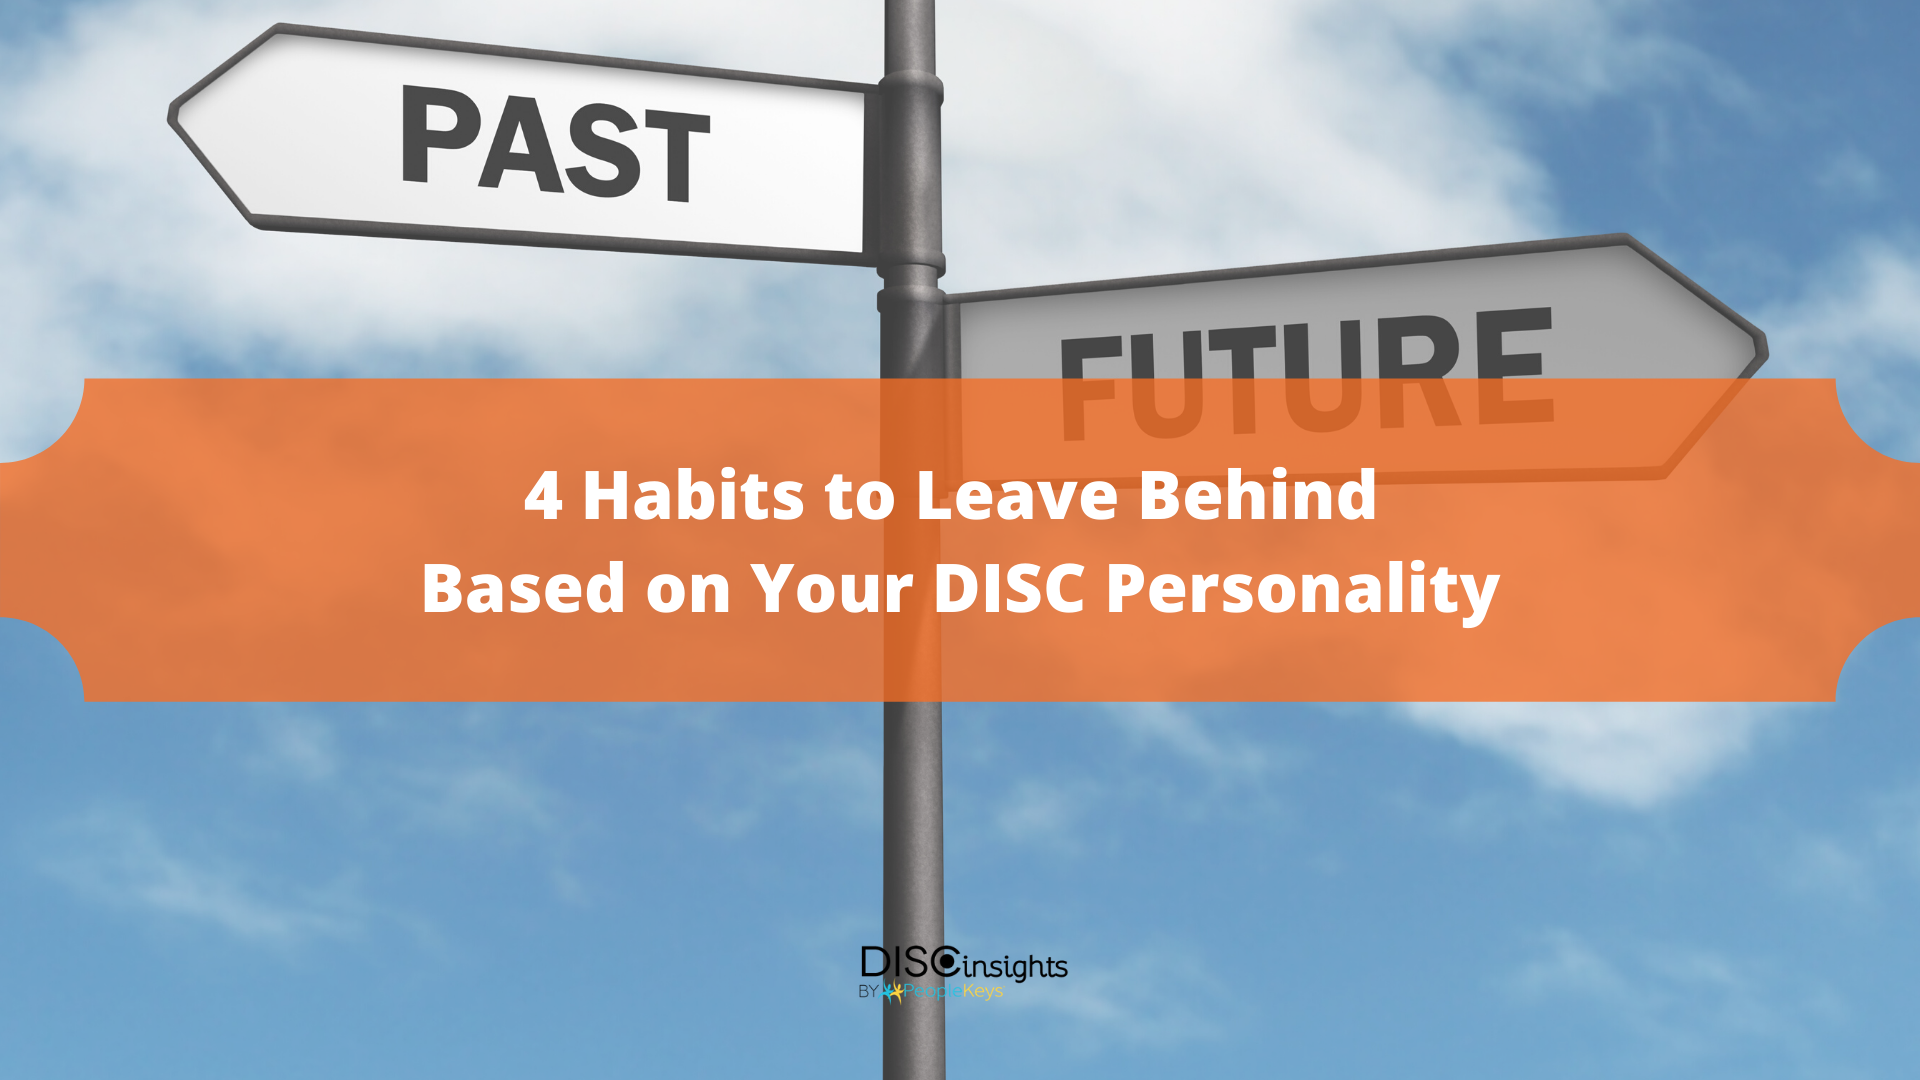 4 Habits to Leave Behind Based on Your DISC Personality